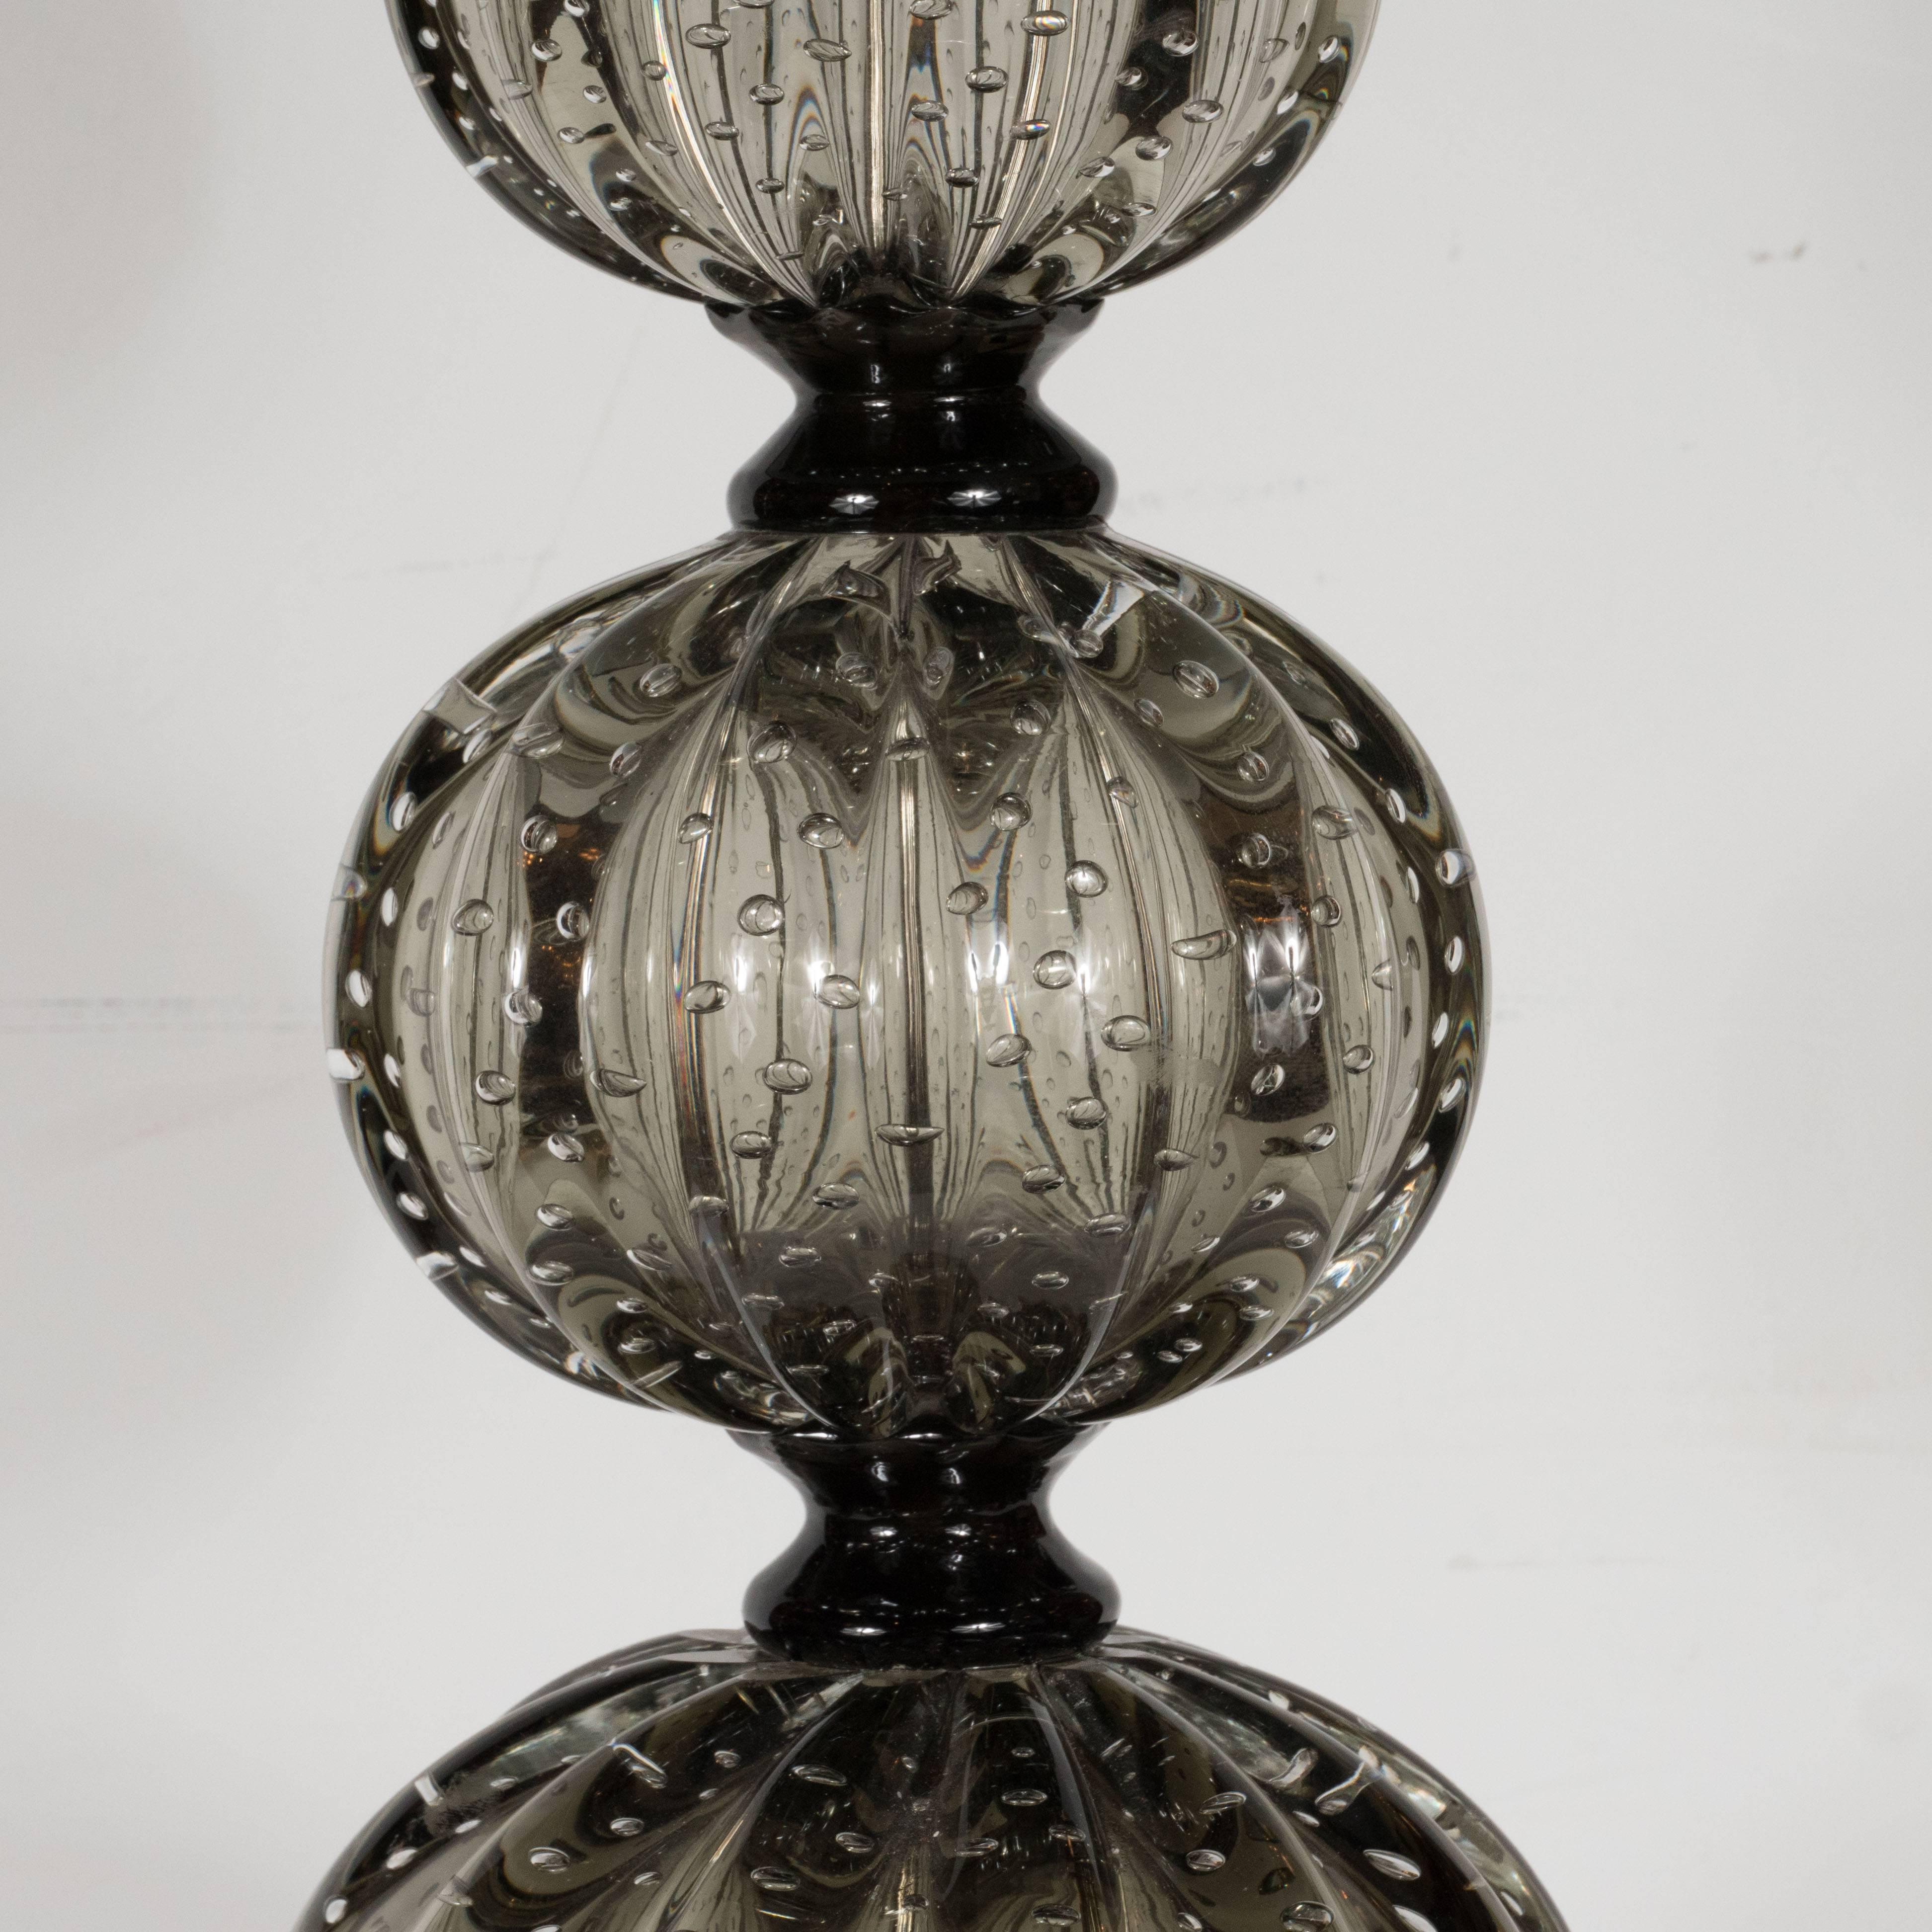 Italian Pair of Handblown Smoked Pewter Murano Glass Table Lamps with Chrome Fittings